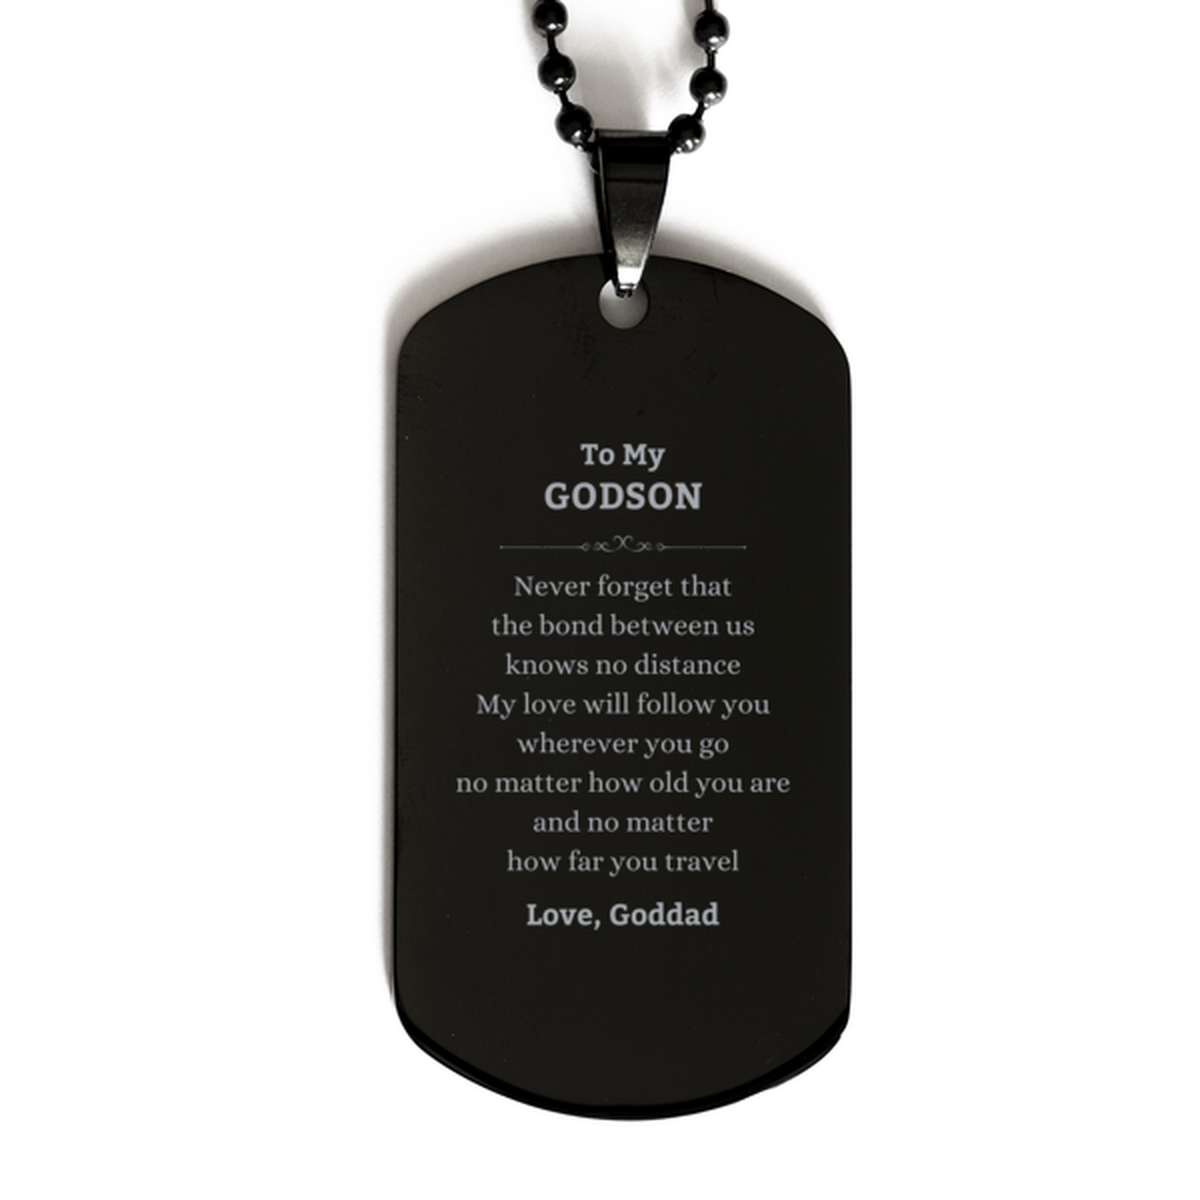 Godson Birthday Gifts from Goddad, Adjustable Black Dog Tag for Godson Christmas Graduation Unique Gifts Godson Never forget that the bond between us knows no distance. Love, Goddad